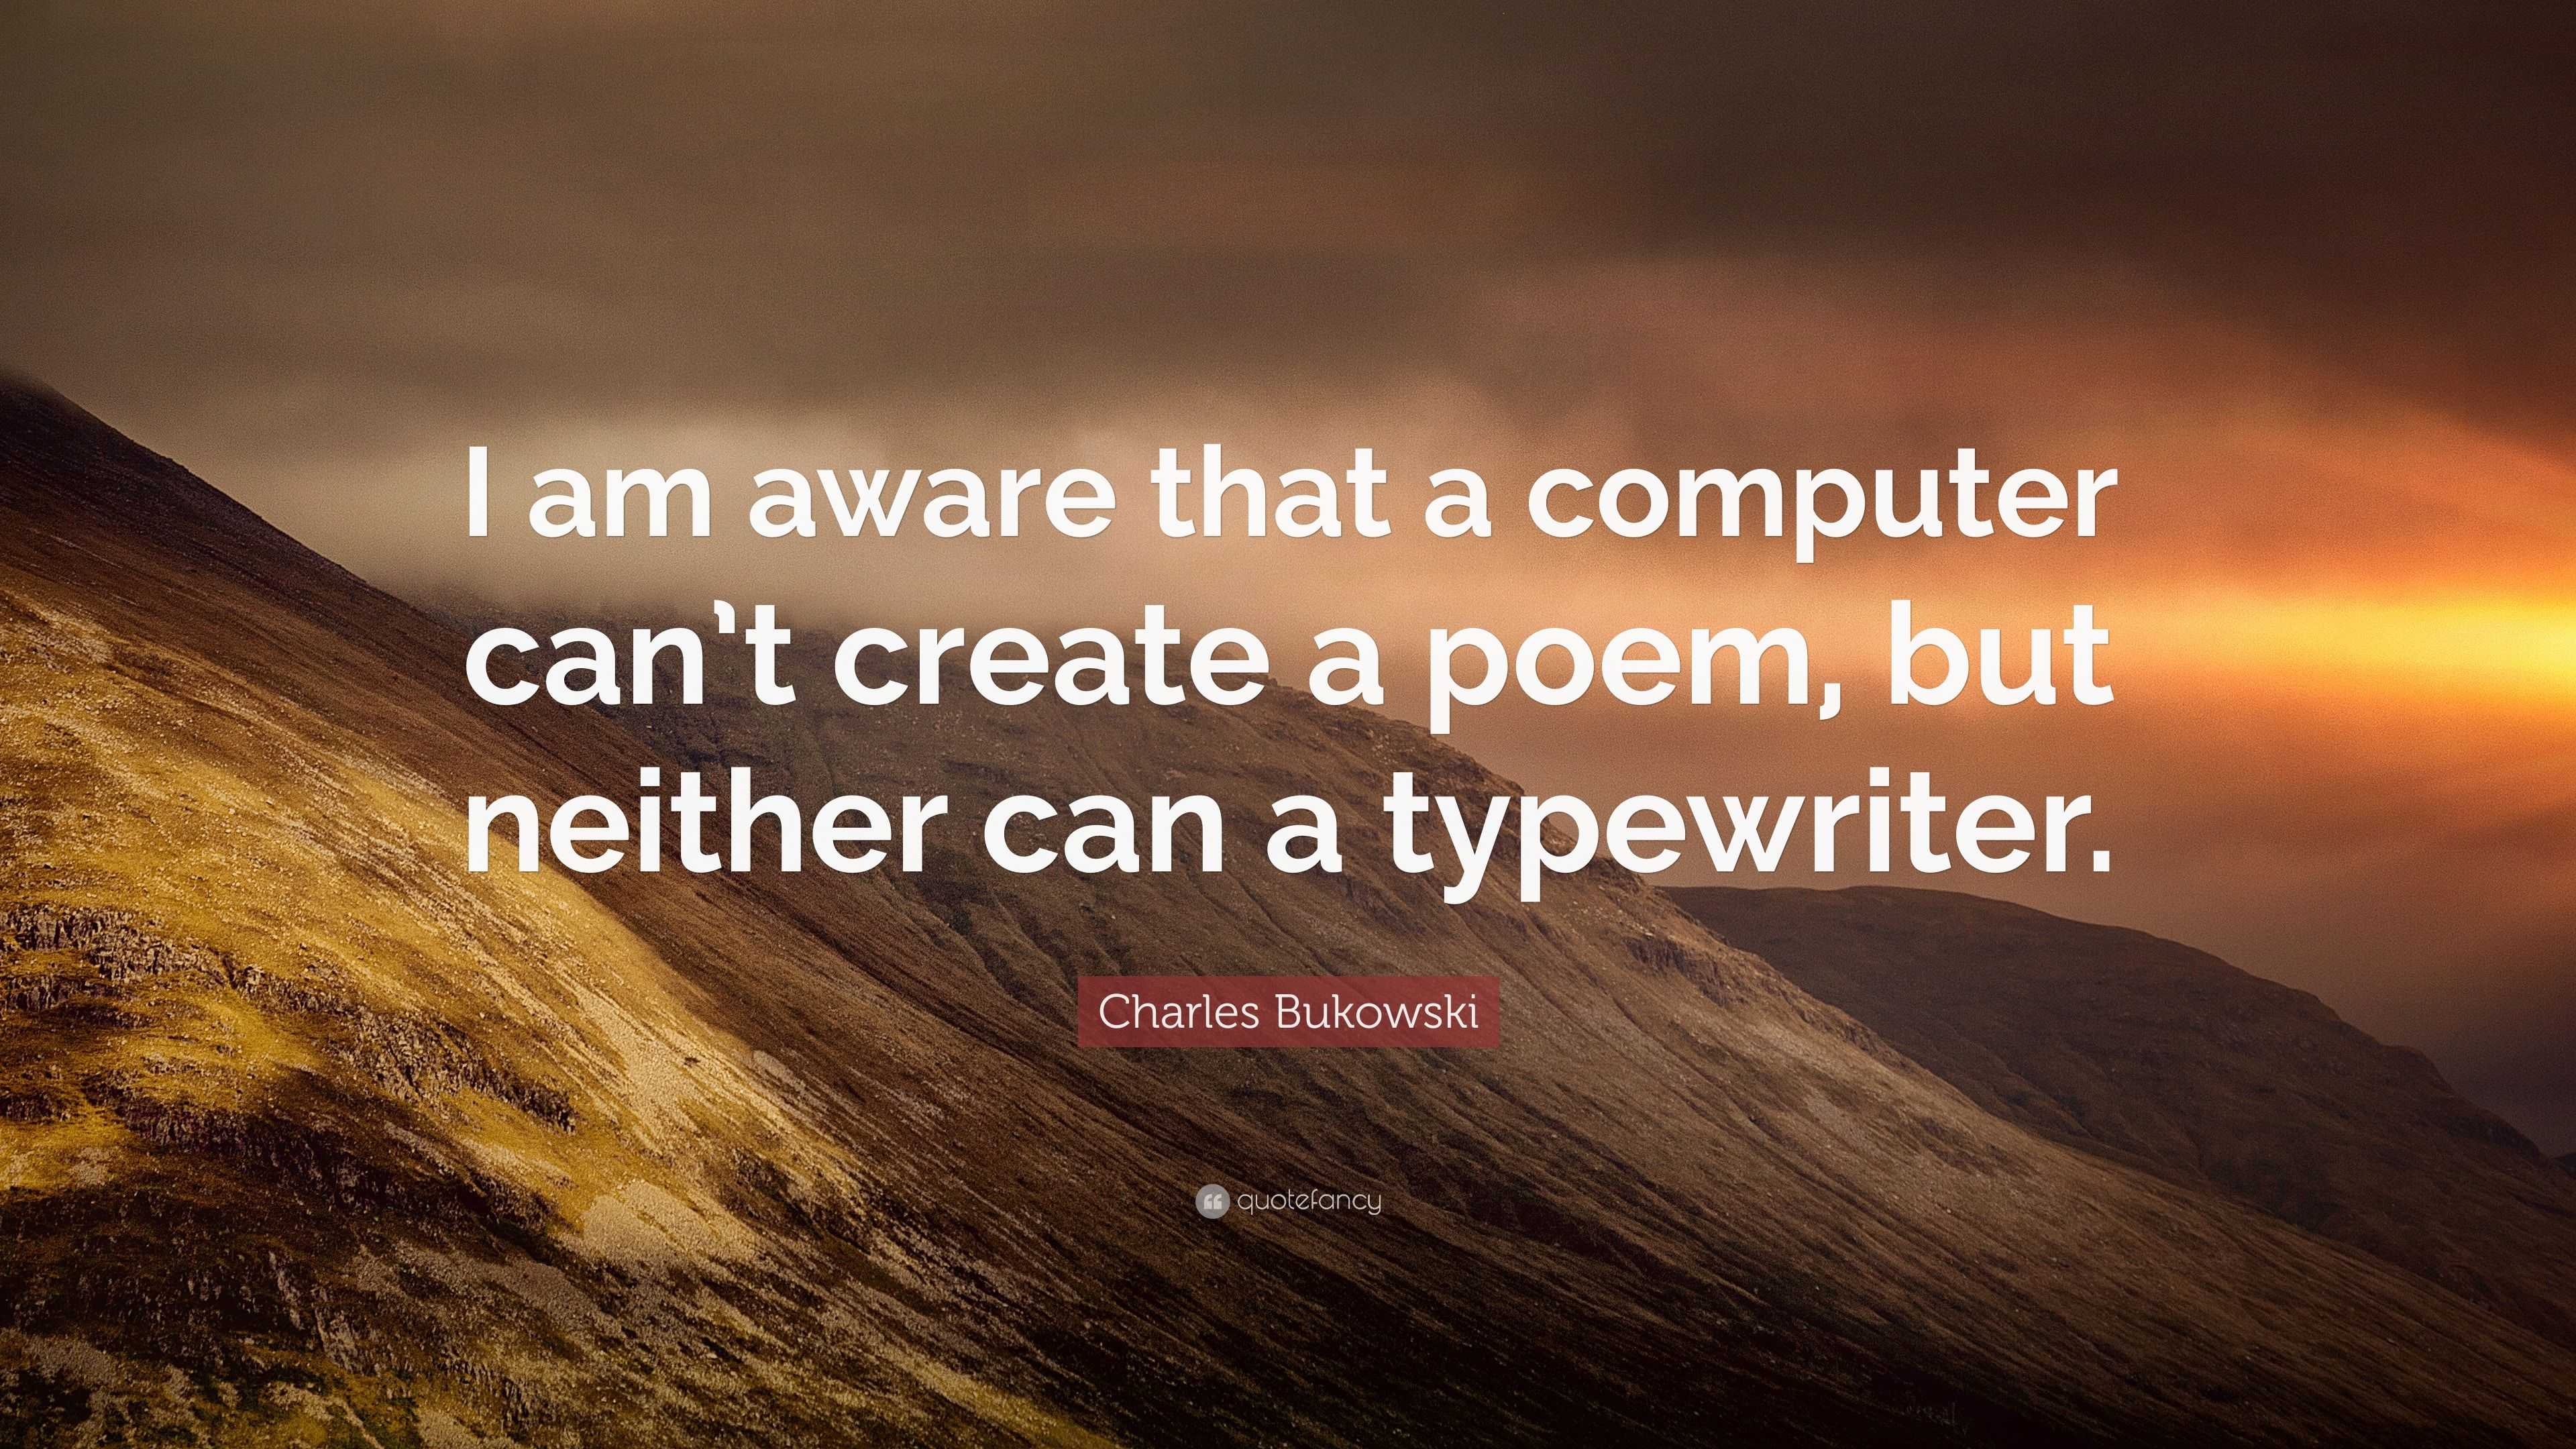 Charles Bukowski Quote: “I am aware that a computer can’t create a poem